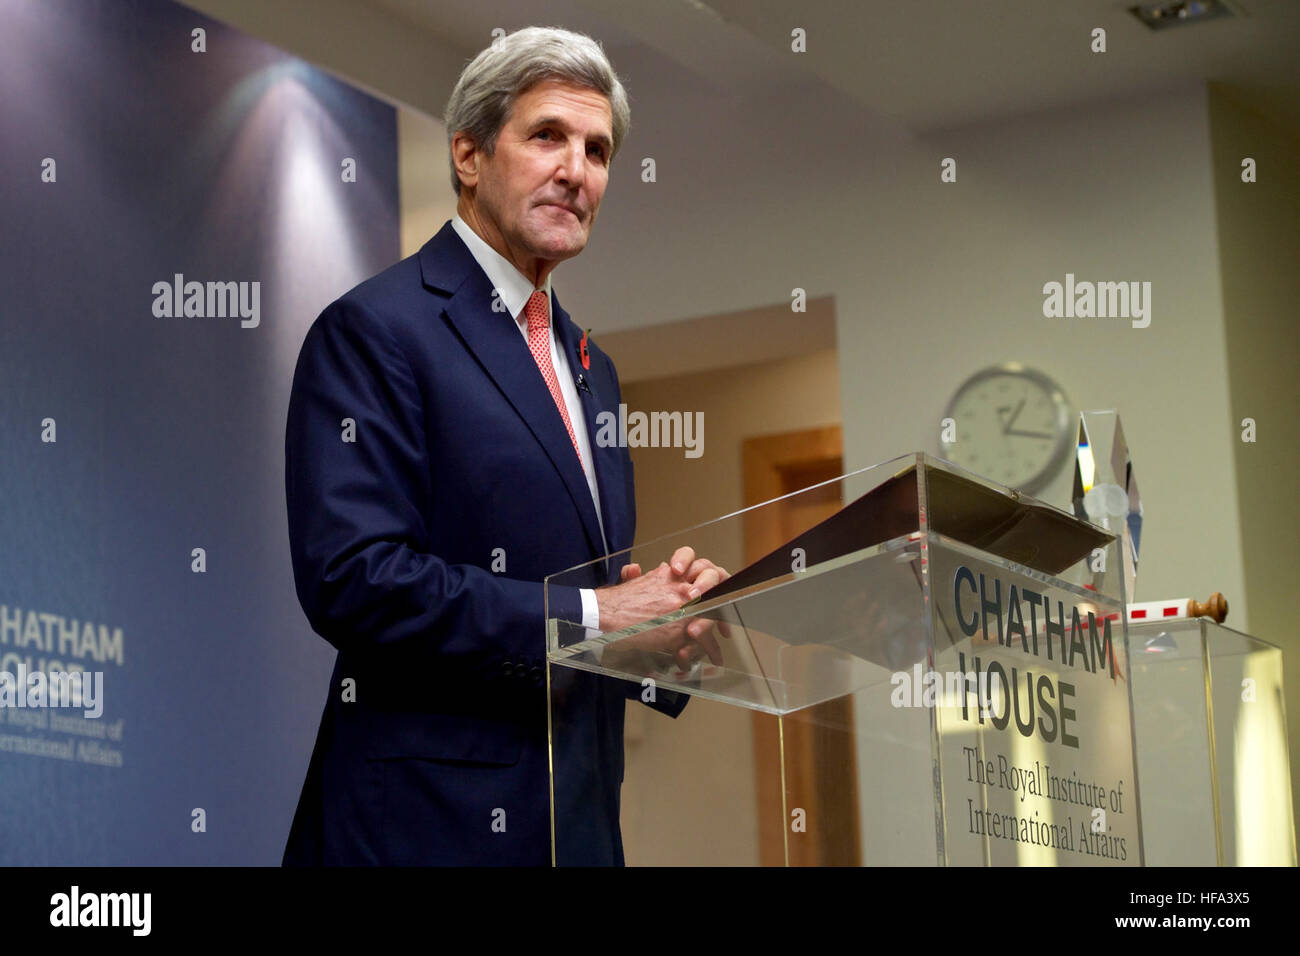 U.S. Secretary of State John Kerry makes remarks after his former counterpart, British Chancellor of the Exchequer Philip Hammond, and Chatham House Director Robin Niblett presented him with the Chatham House Prize in tandem with Iranian Foreign Minister Javad Zarif at the headquarters of the famed international think-tank in London, U.K., on October 31, 2016. Stock Photo